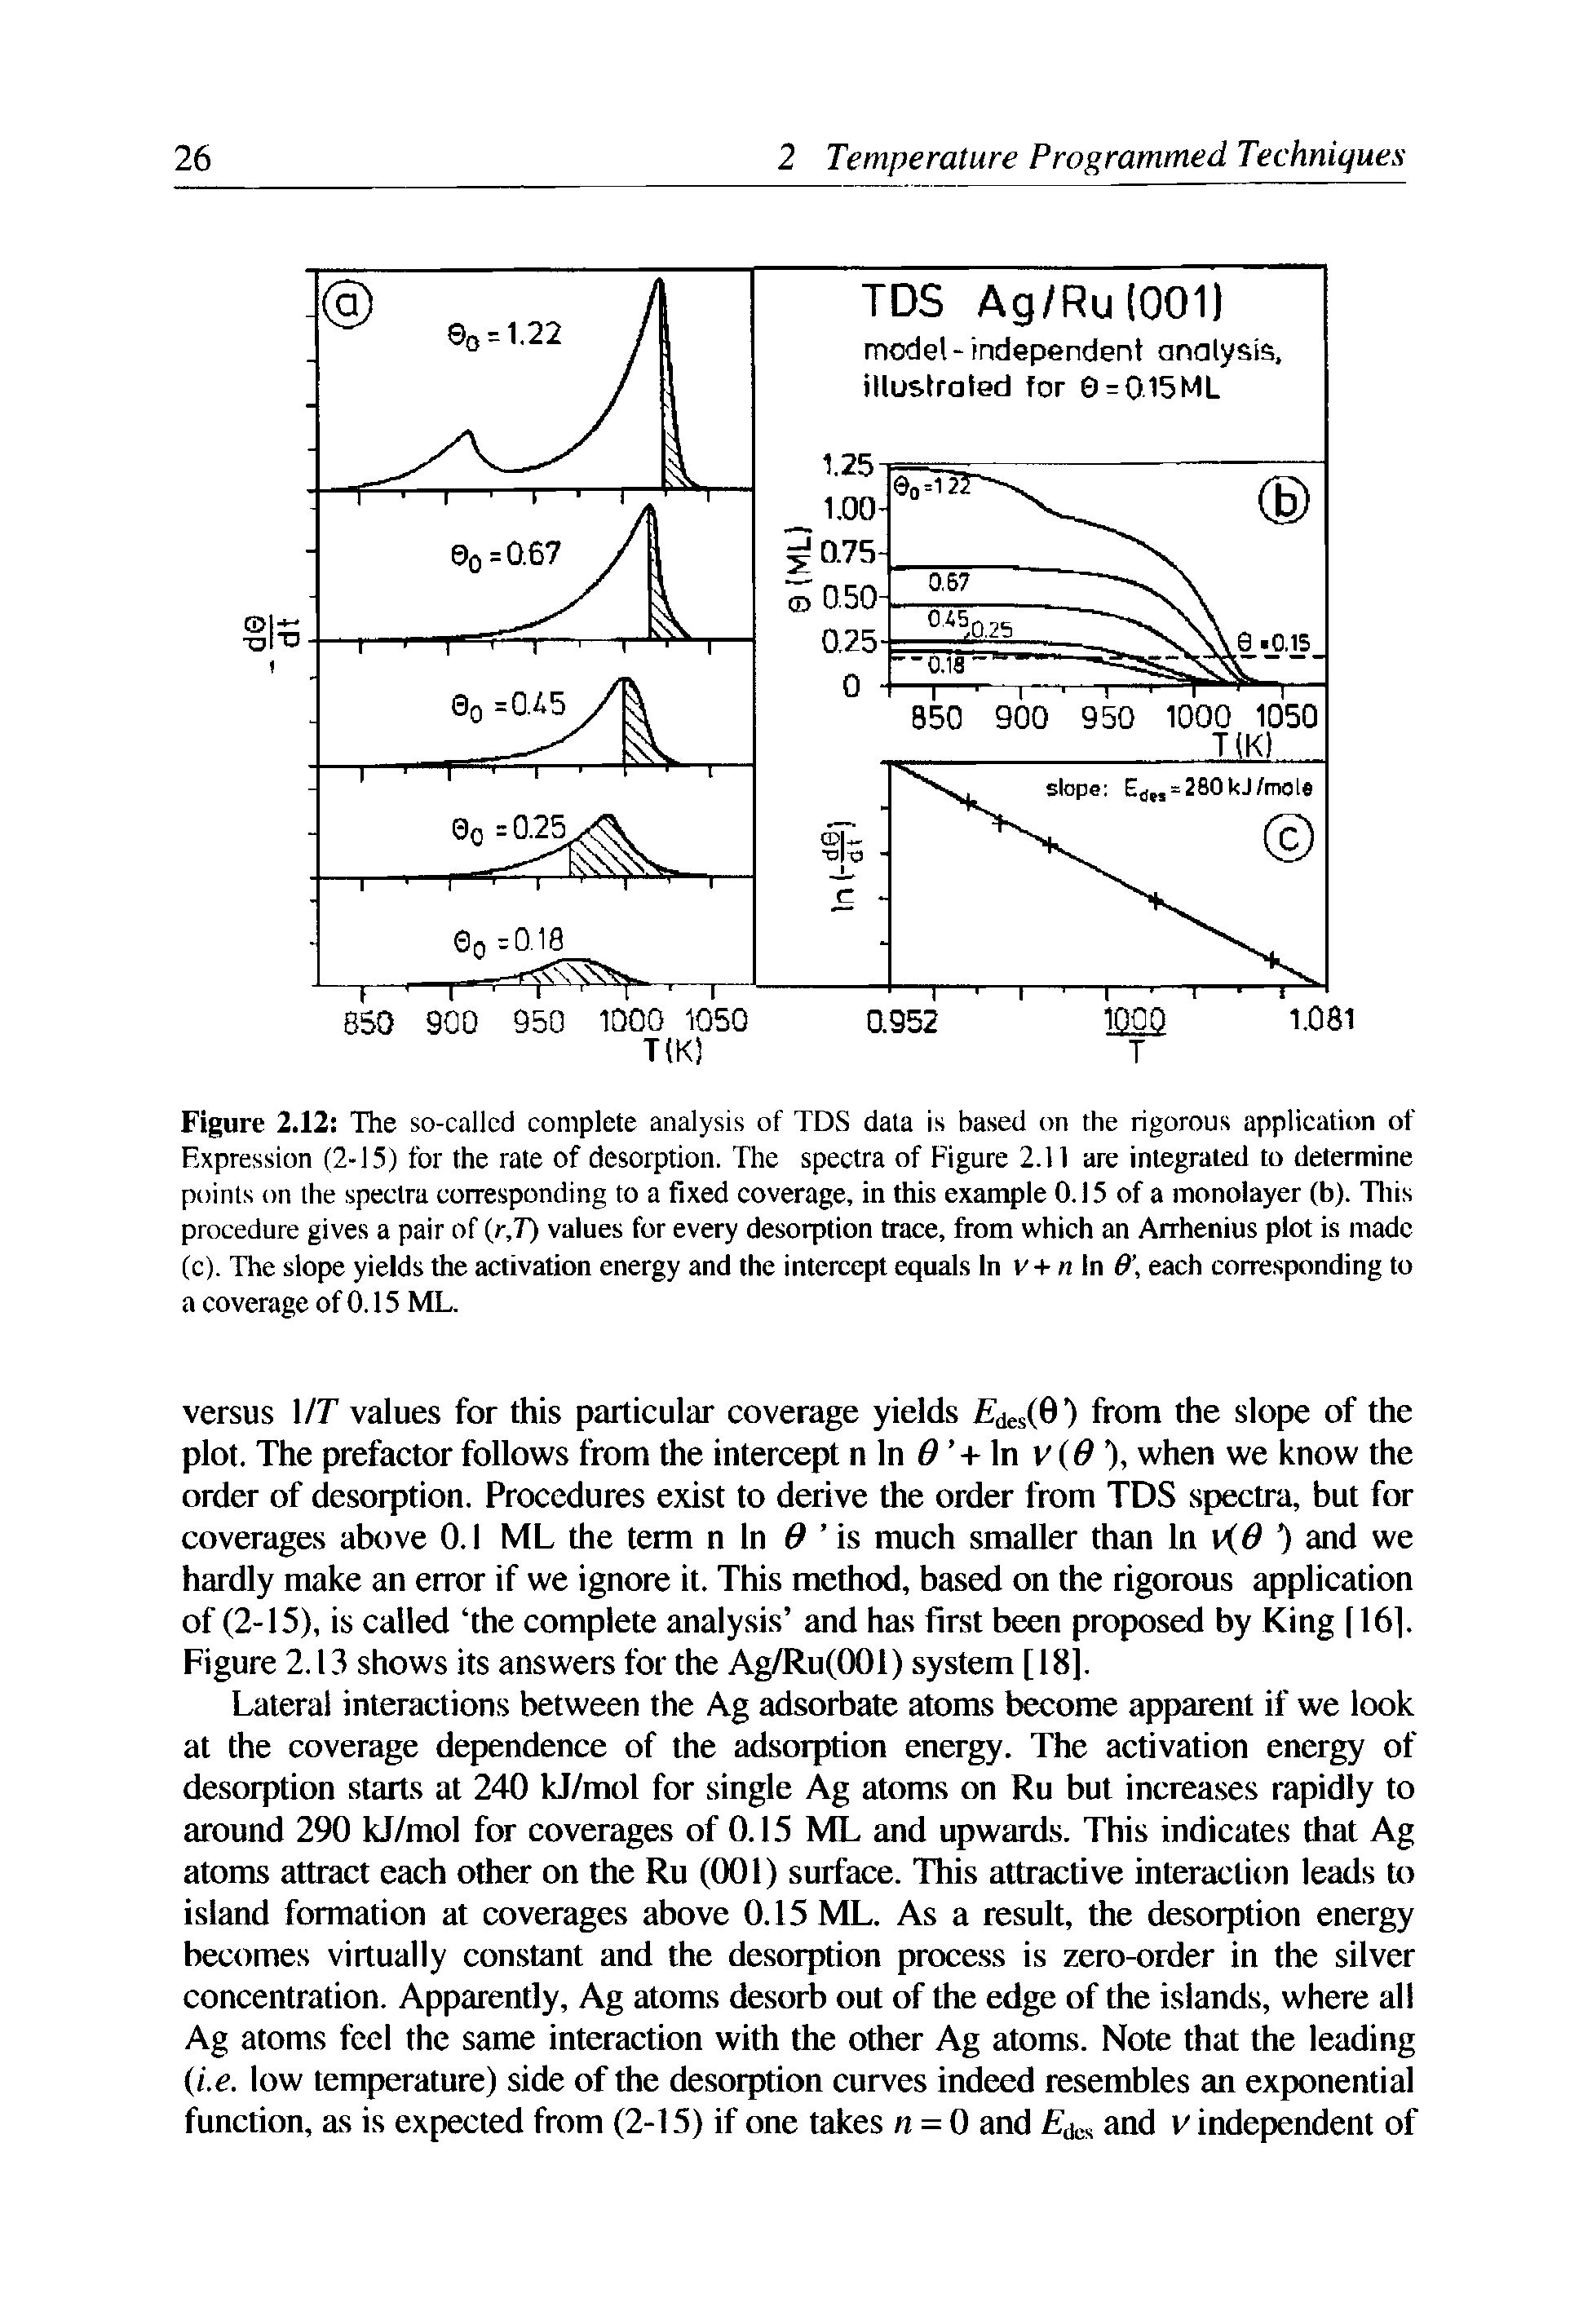 Figure 2.12 The so-called complete analysis of TDS data is based on the rigorous application of Expression (2-15) for the rate of desorption. The spectra of Figure 2.11 are integrated to determine points on the spectra corresponding to a fixed coverage, in this example 0.15 of a monolayer (b). This procedure gives a pair of (r,T) values for every desorption trace, from which an Arrhenius plot is made (c). The slope yields the activation energy and the intercept equals In v+n In 9 each corresponding to a coverage of 0.15 ML.